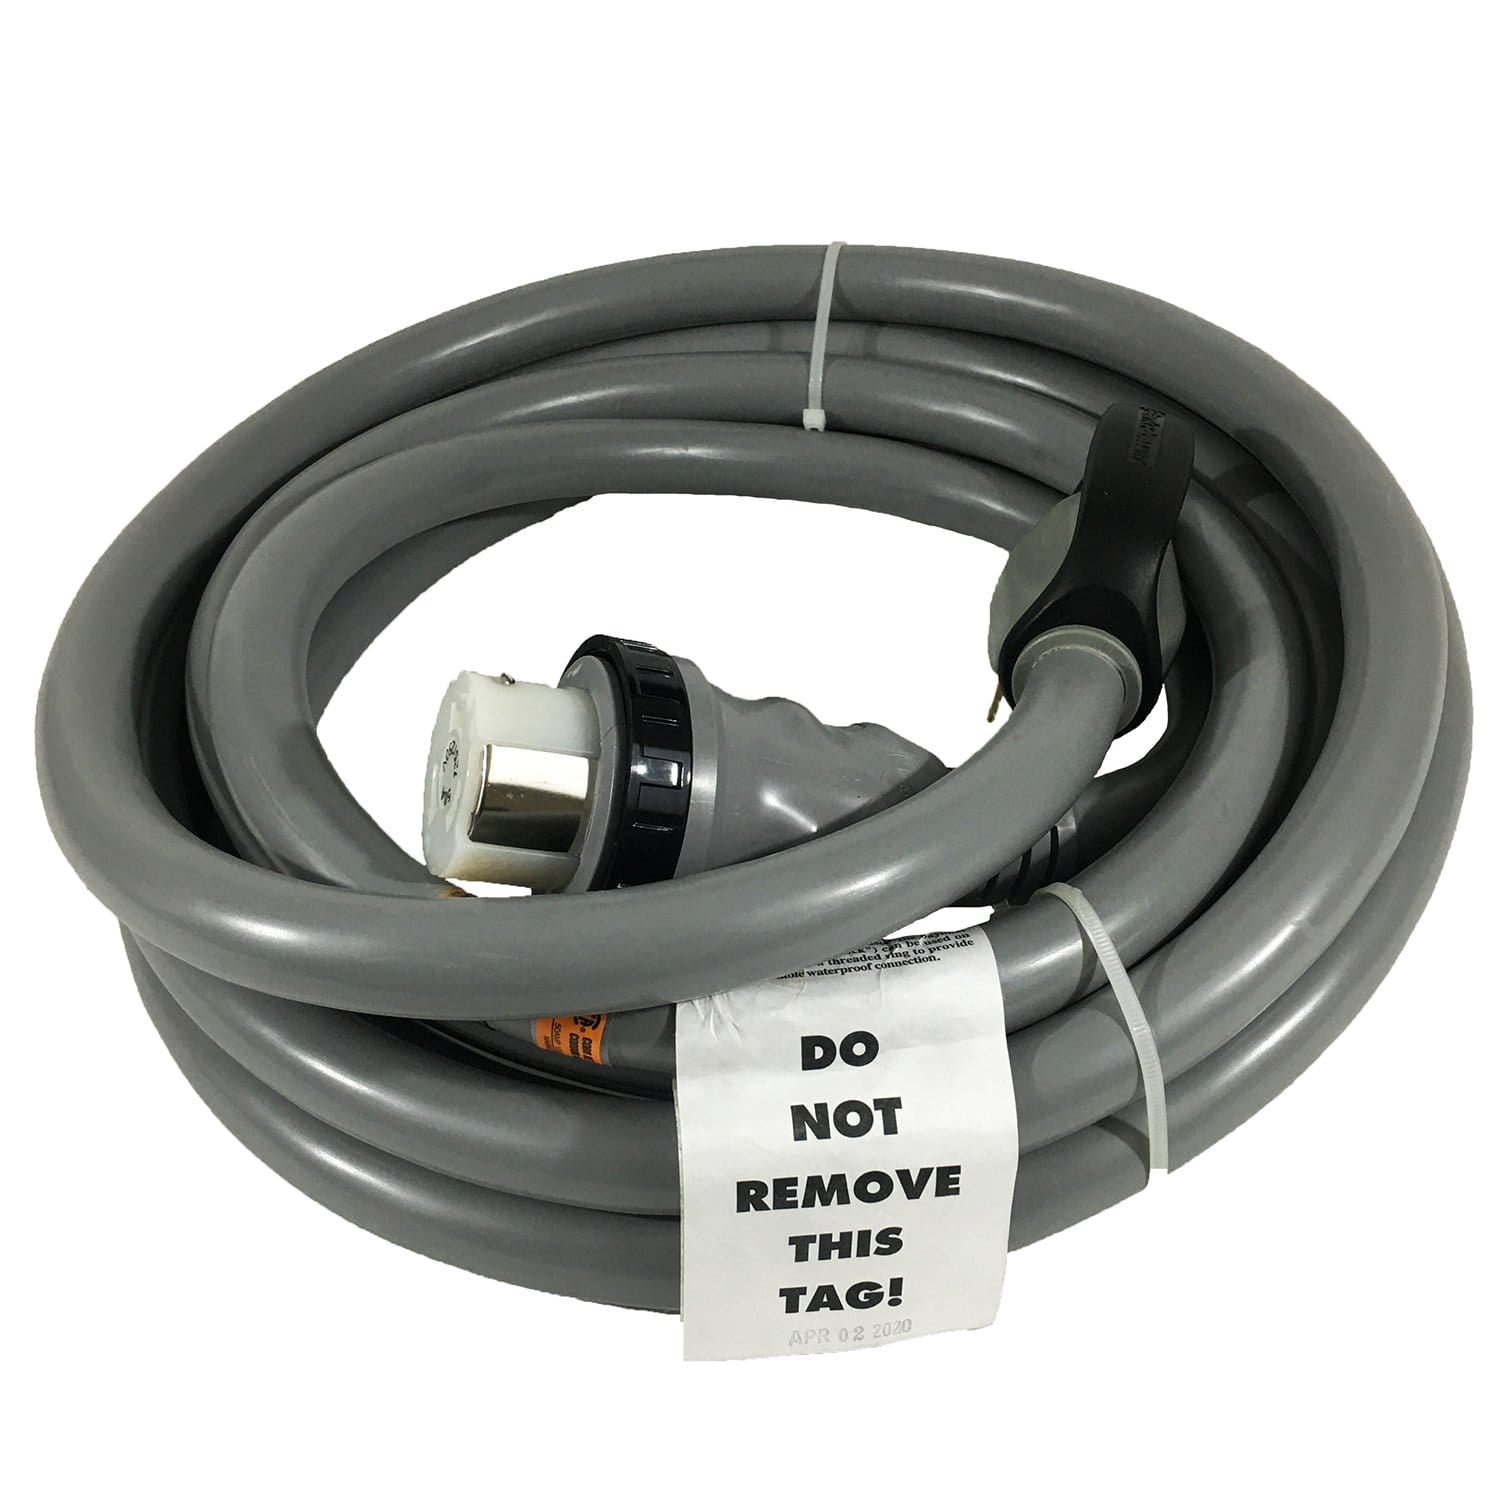 Park Power 6152SPPGRV-25 25' Extension Power Cord with Standard Grip